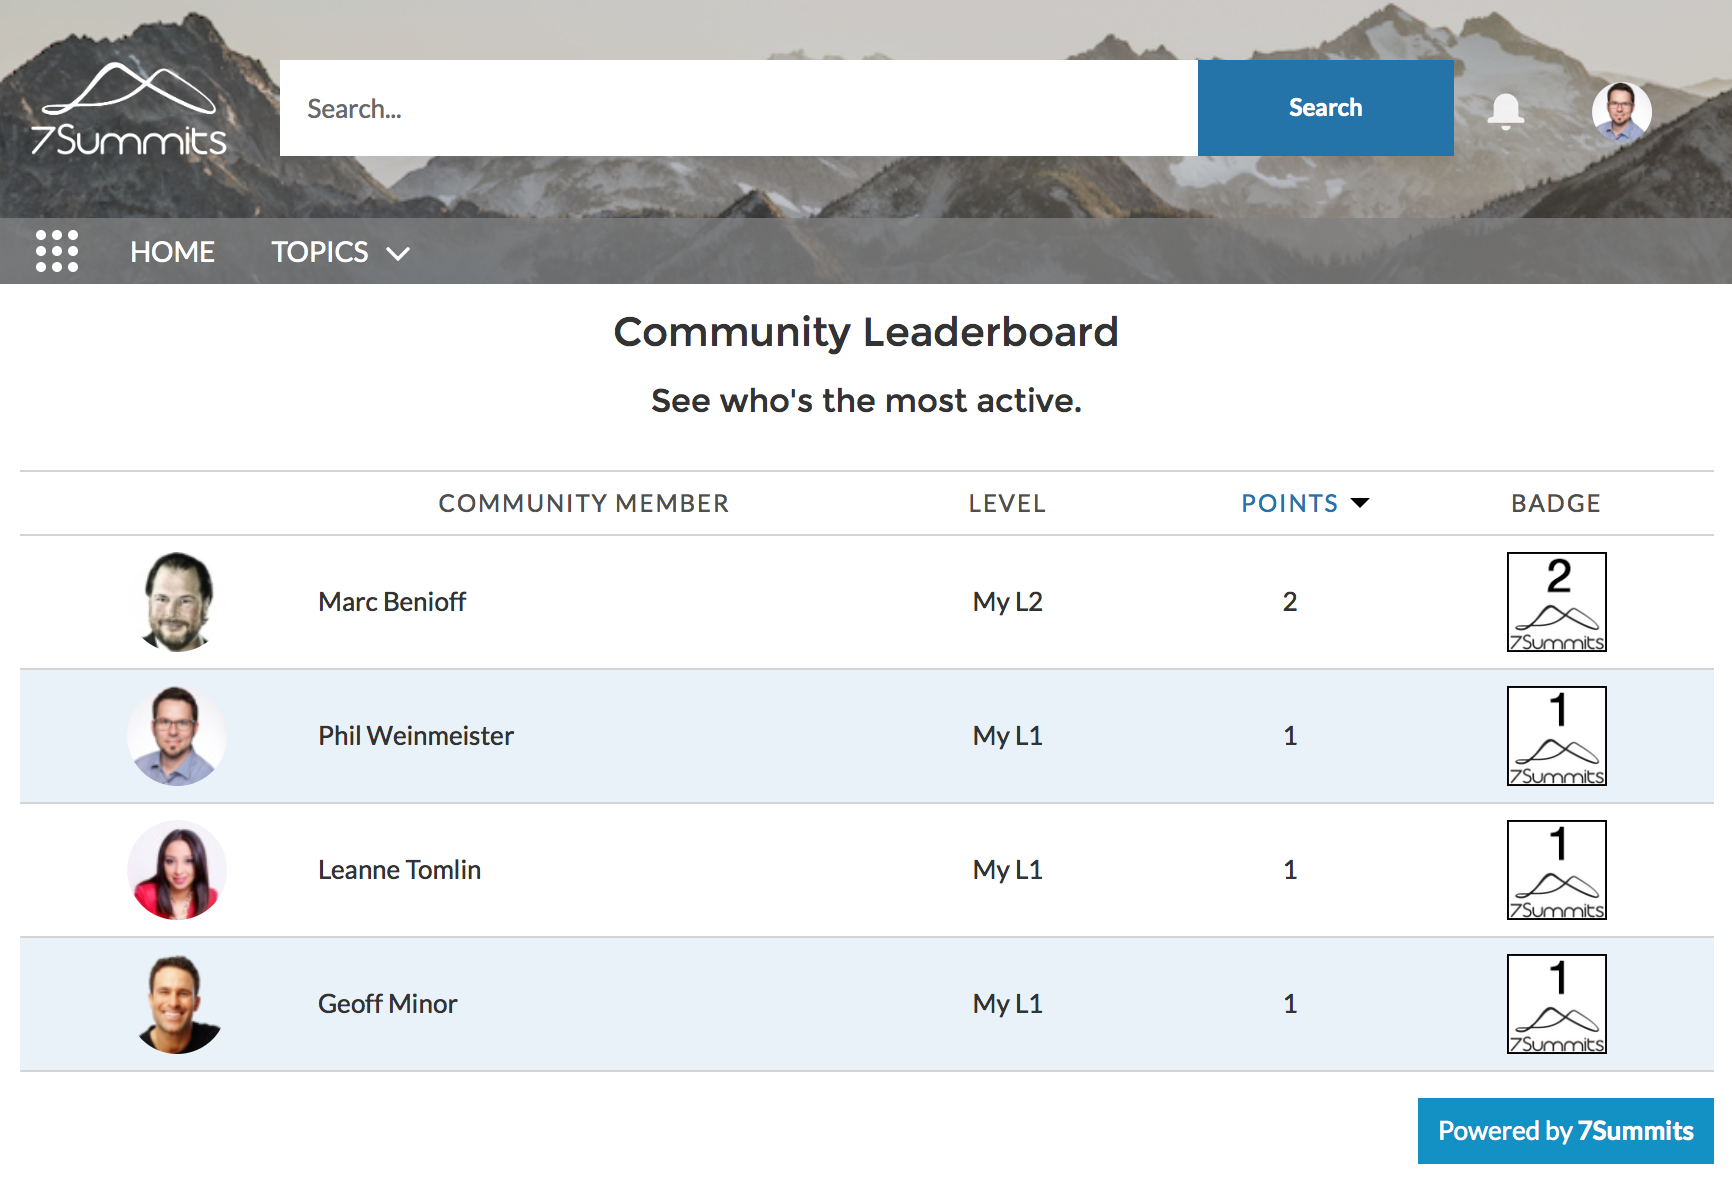 How To Use Leaderboards to Socially Reinforce Performance Results